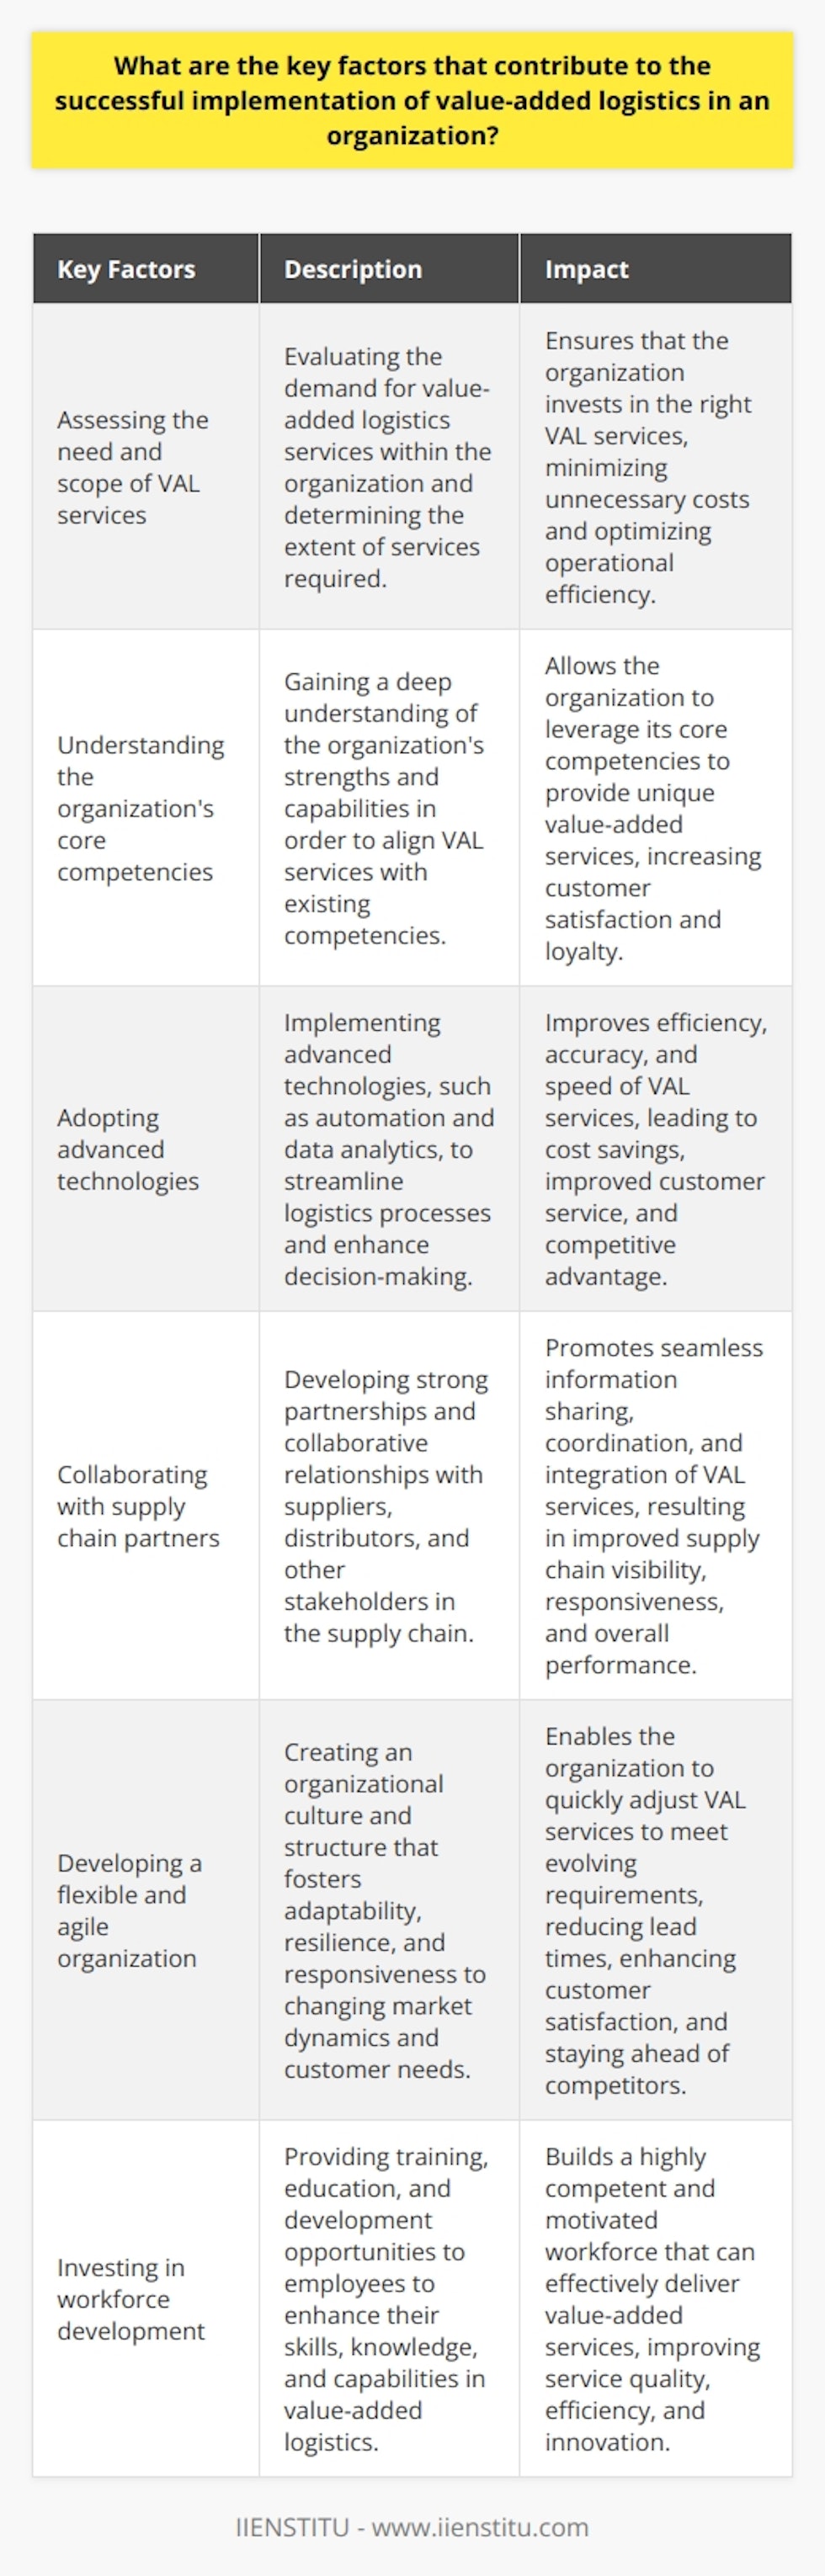 In conclusion, the successful implementation of value-added logistics in an organization is influenced by several key factors. These include assessing the need and scope of VAL services, understanding the organization's core competencies, adopting advanced technologies, collaborating with supply chain partners, developing a flexible and agile organization, and investing in workforce development. By considering and addressing these factors, organizations can enhance their supply chain operations, deliver superior value-added services, and gain a competitive edge in the market.